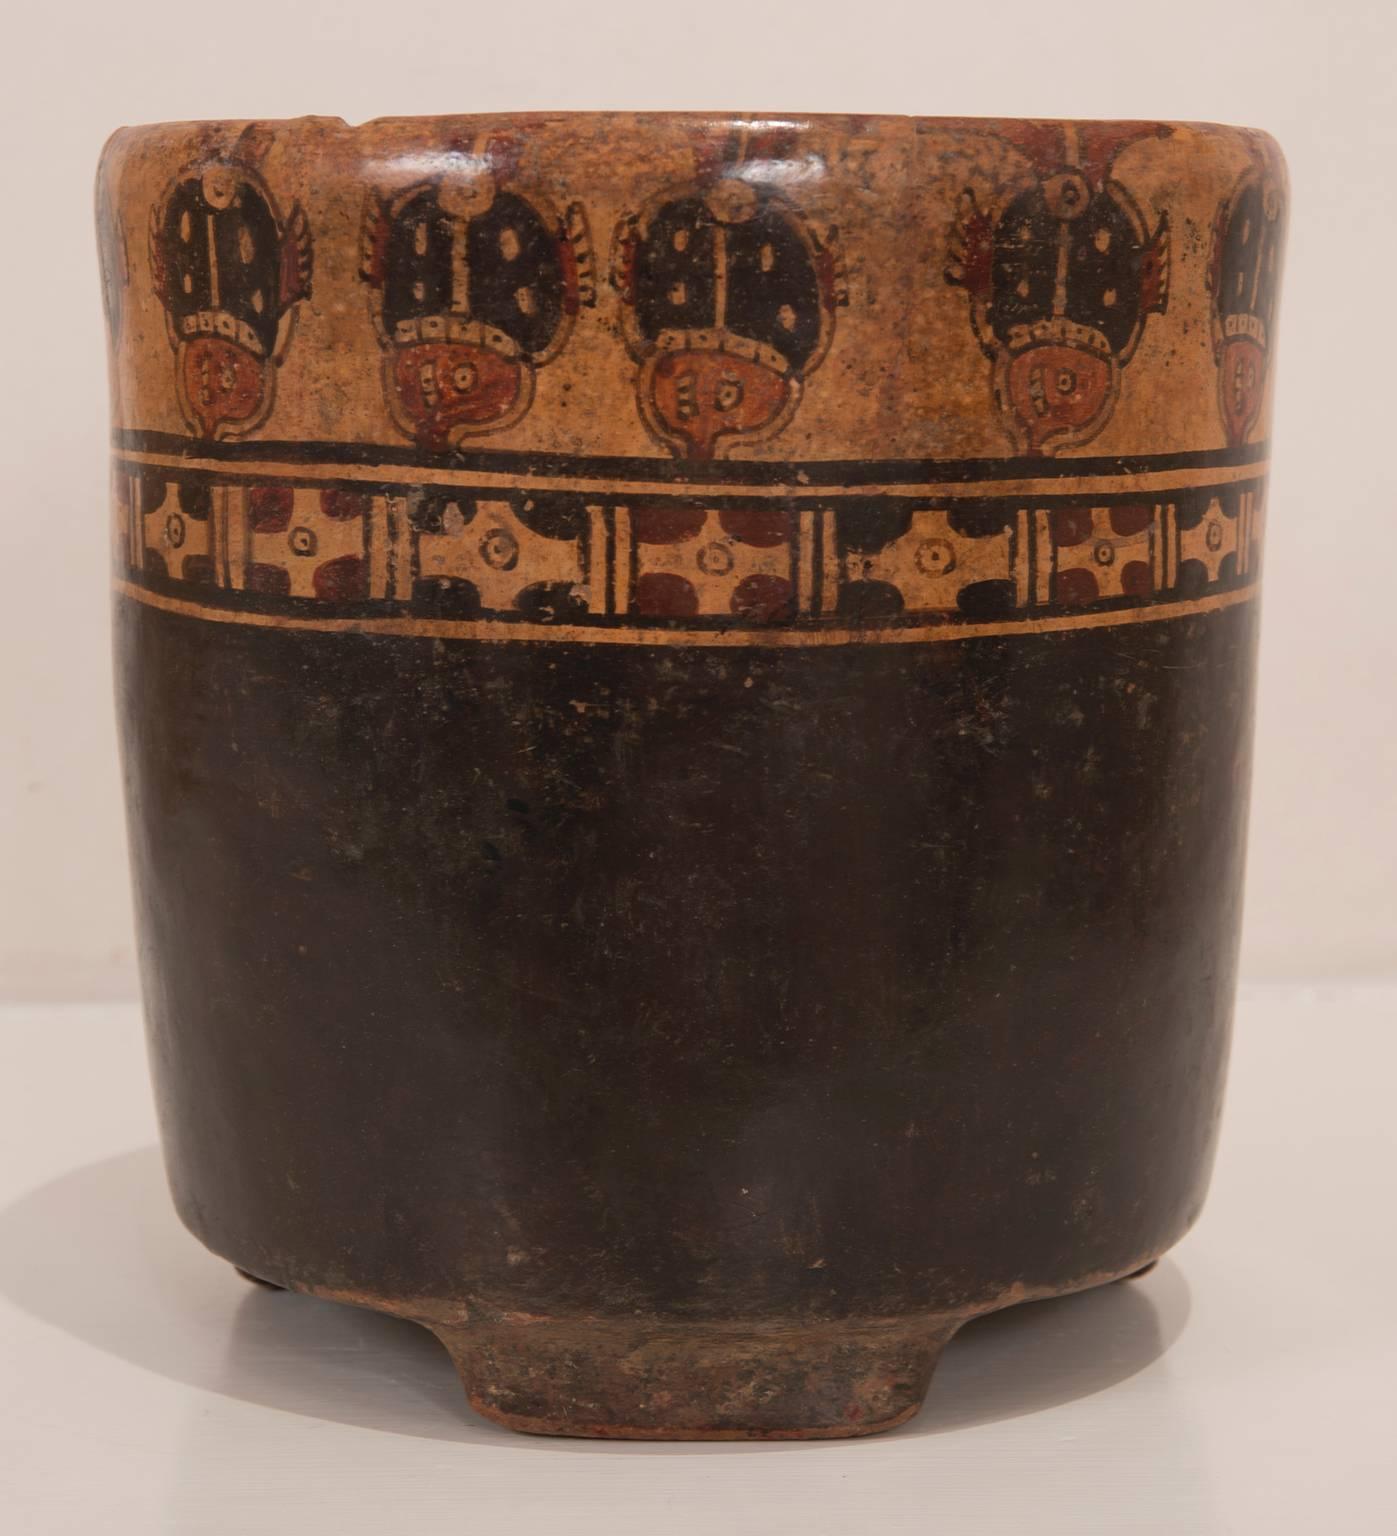 Pre-Columbian, Honduras, Ulua Valley, polychromed pottery cylinder standing on lug type tripot feet, painted in shades of red, orange and black. Upper bar features a repeating series of zoomorphic figures.